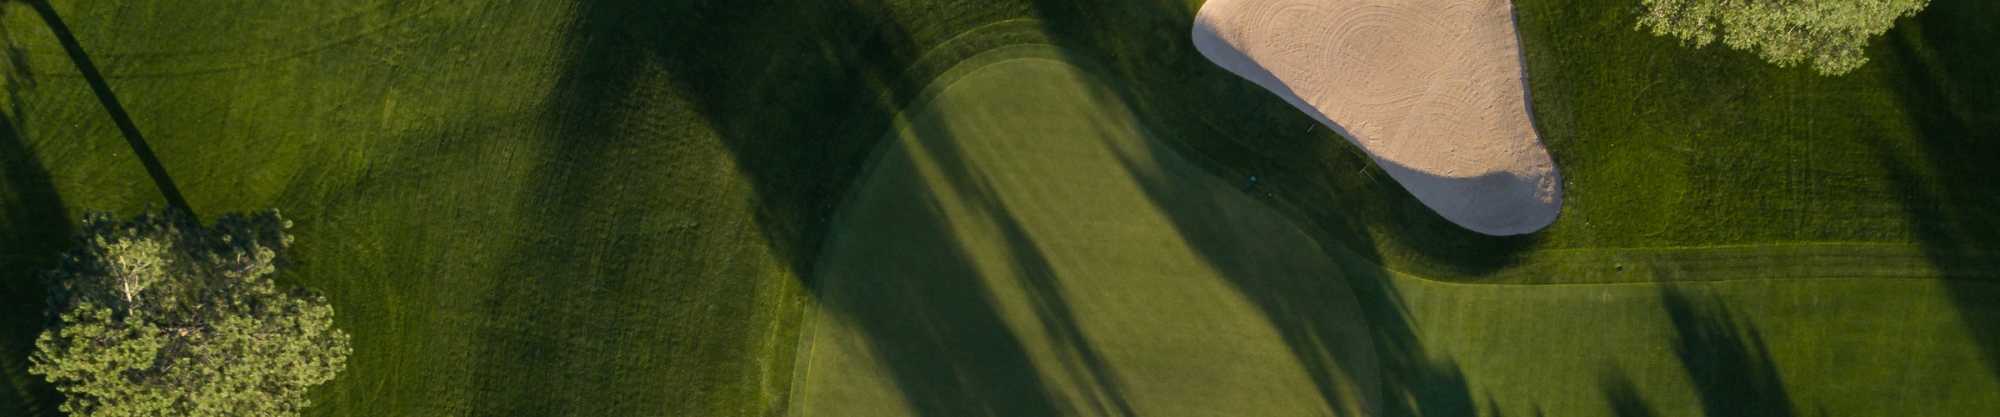 Aerial image of golf green